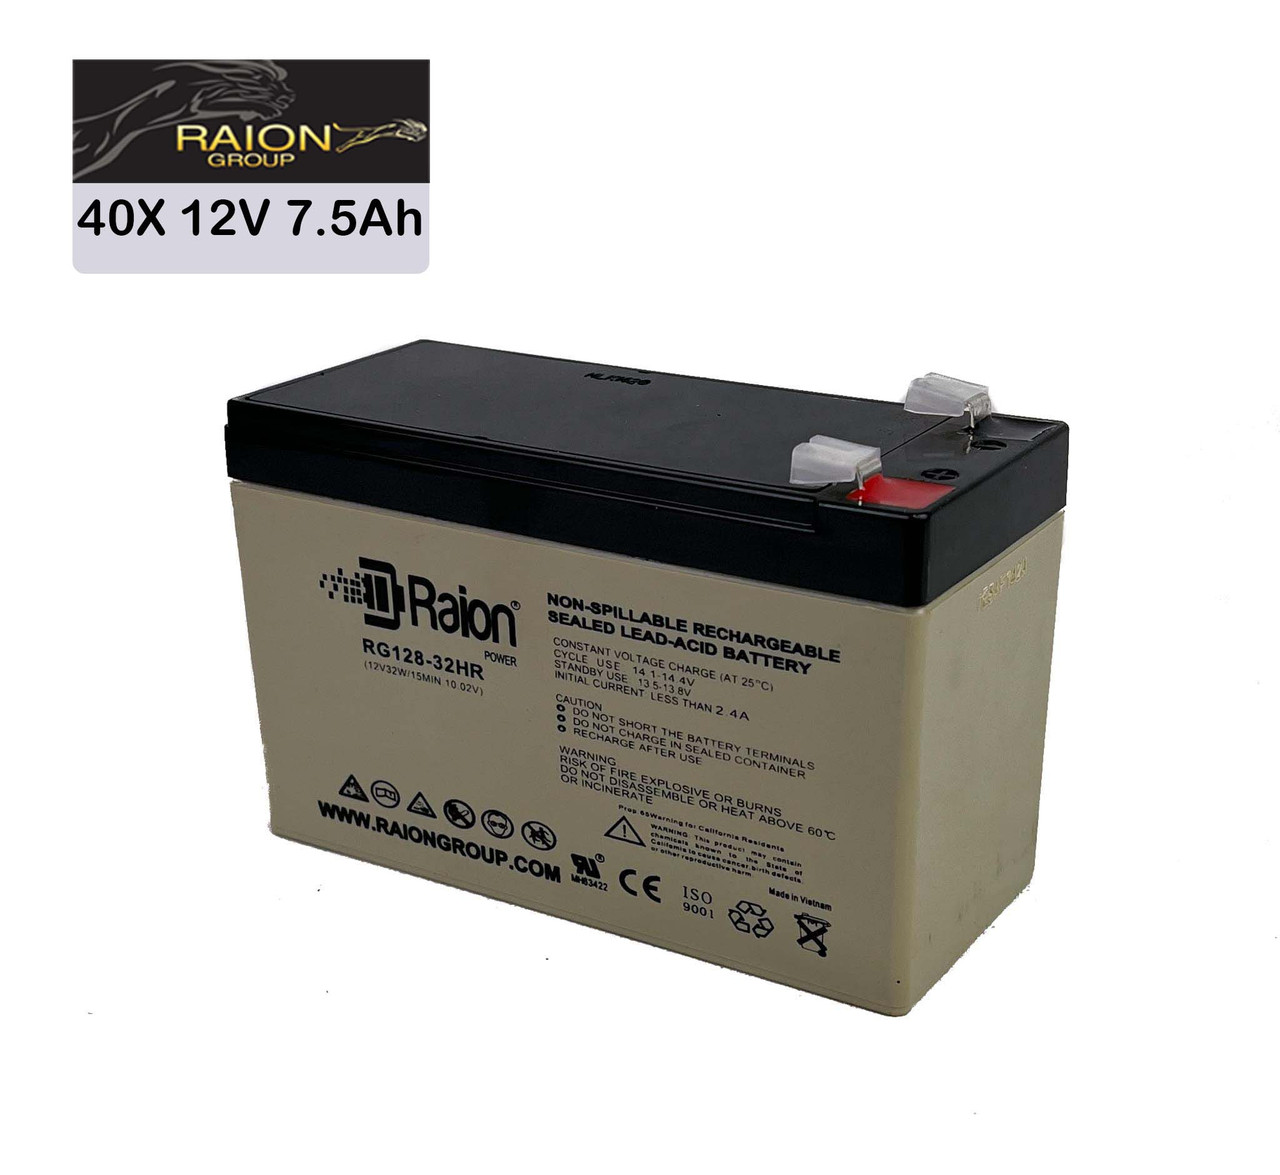 Raion Power 12V 7.5Ah High Rate Discharge UPS Batteries for ONEAC SE202XAT - 40 Pack